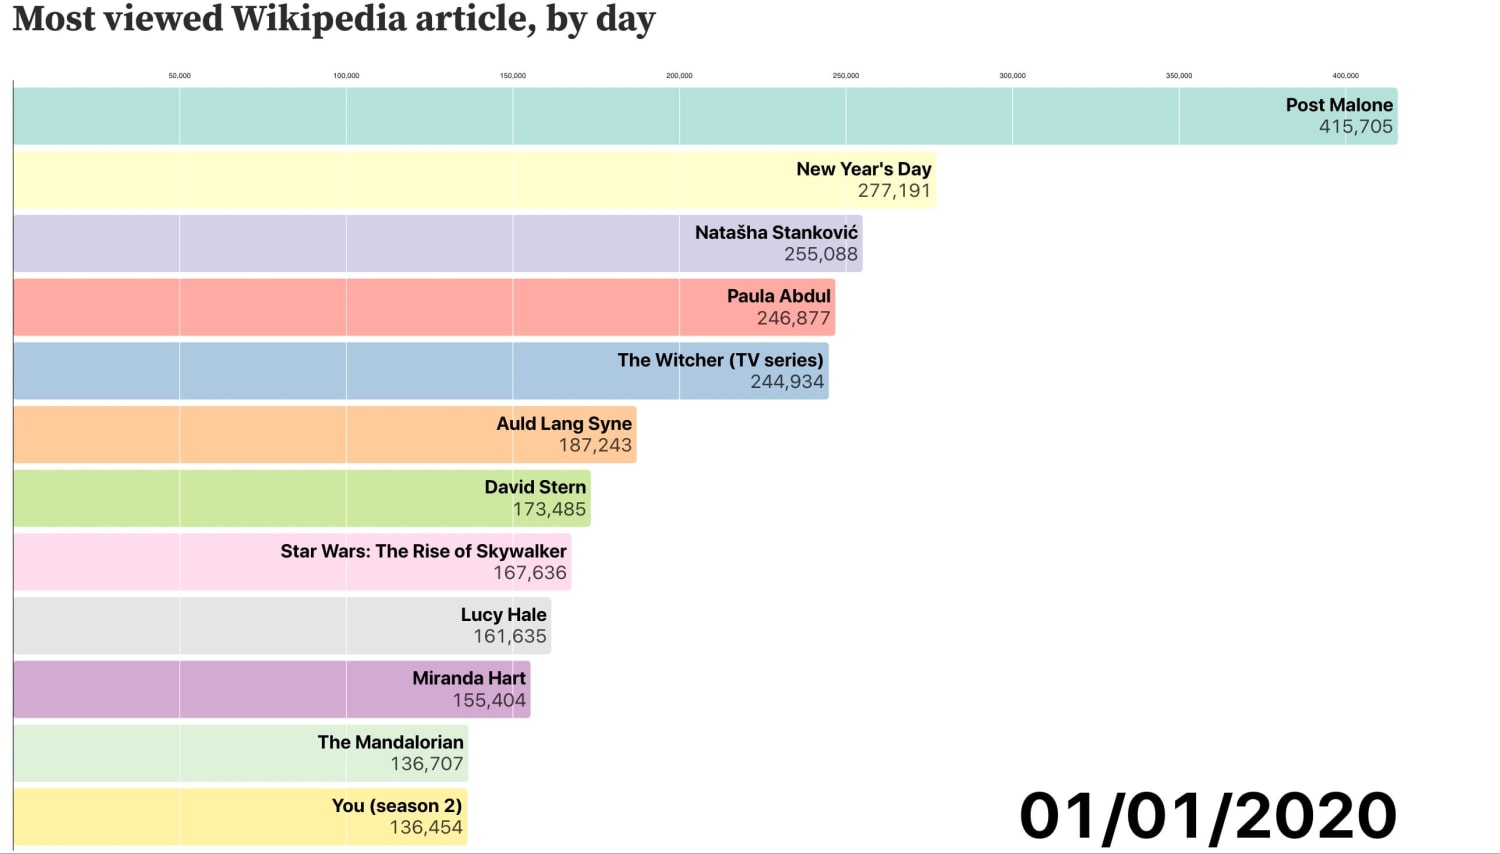 Time goes quickly.... the most viewed Wikipedia articles by day in January 2020